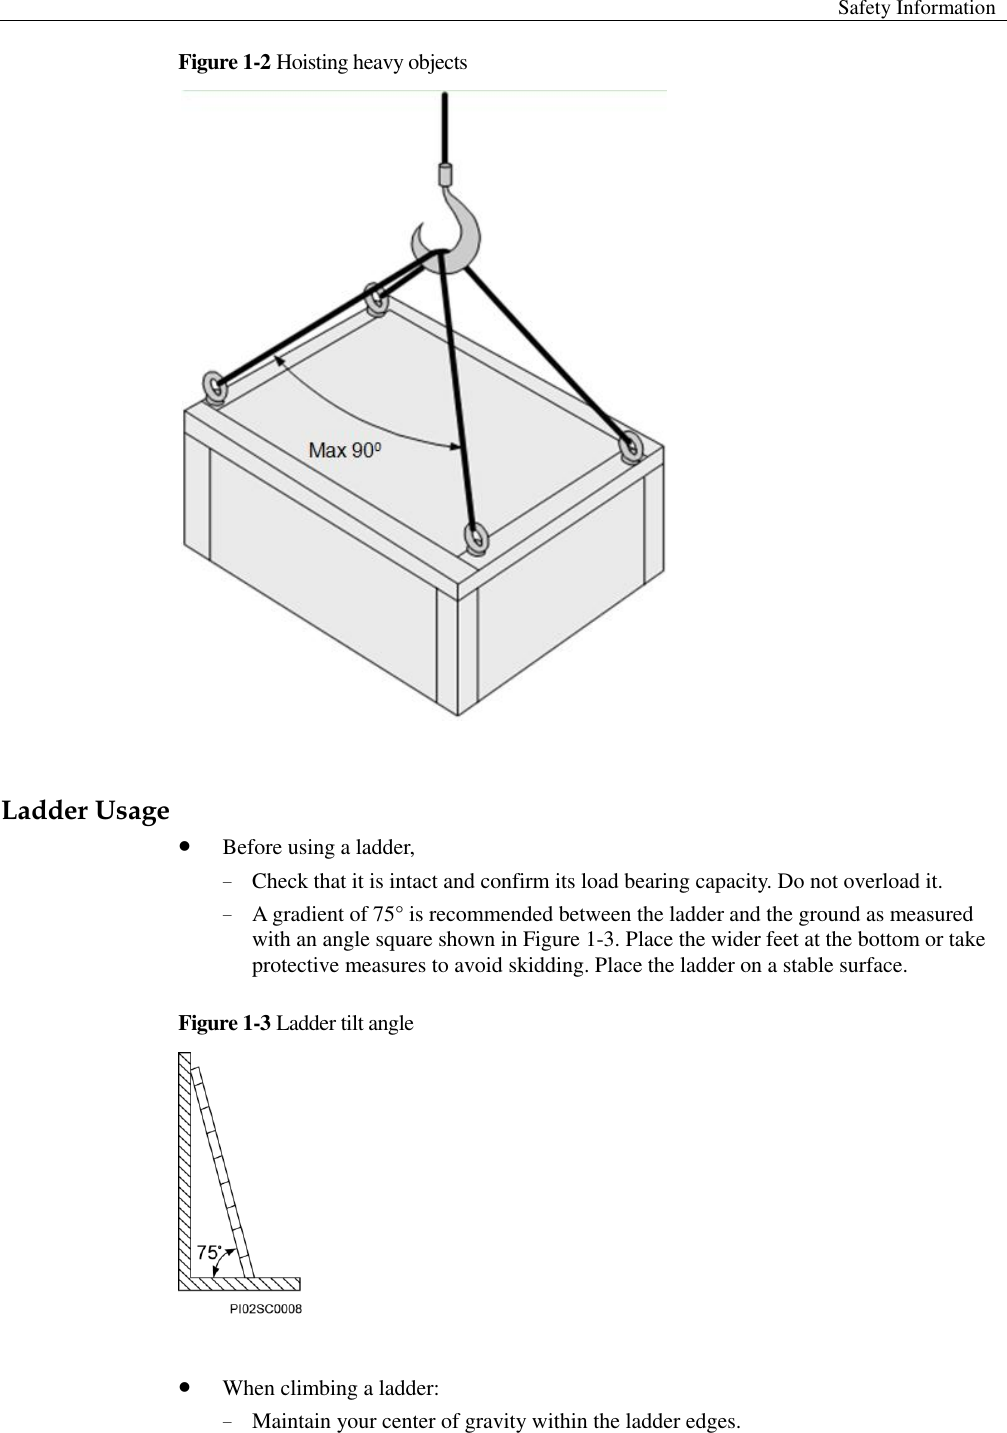  Safety Information  Figure 1-2 Hoisting heavy objects   Ladder Usage    Before using a ladder,   − Check that it is intact and confirm its load bearing capacity. Do not overload it.   − A gradient of 75° is recommended between the ladder and the ground as measured with an angle square shown in Figure 1-3. Place the wider feet at the bottom or take protective measures to avoid skidding. Place the ladder on a stable surface.   Figure 1-3 Ladder tilt angle    When climbing a ladder:   − Maintain your center of gravity within the ladder edges.   